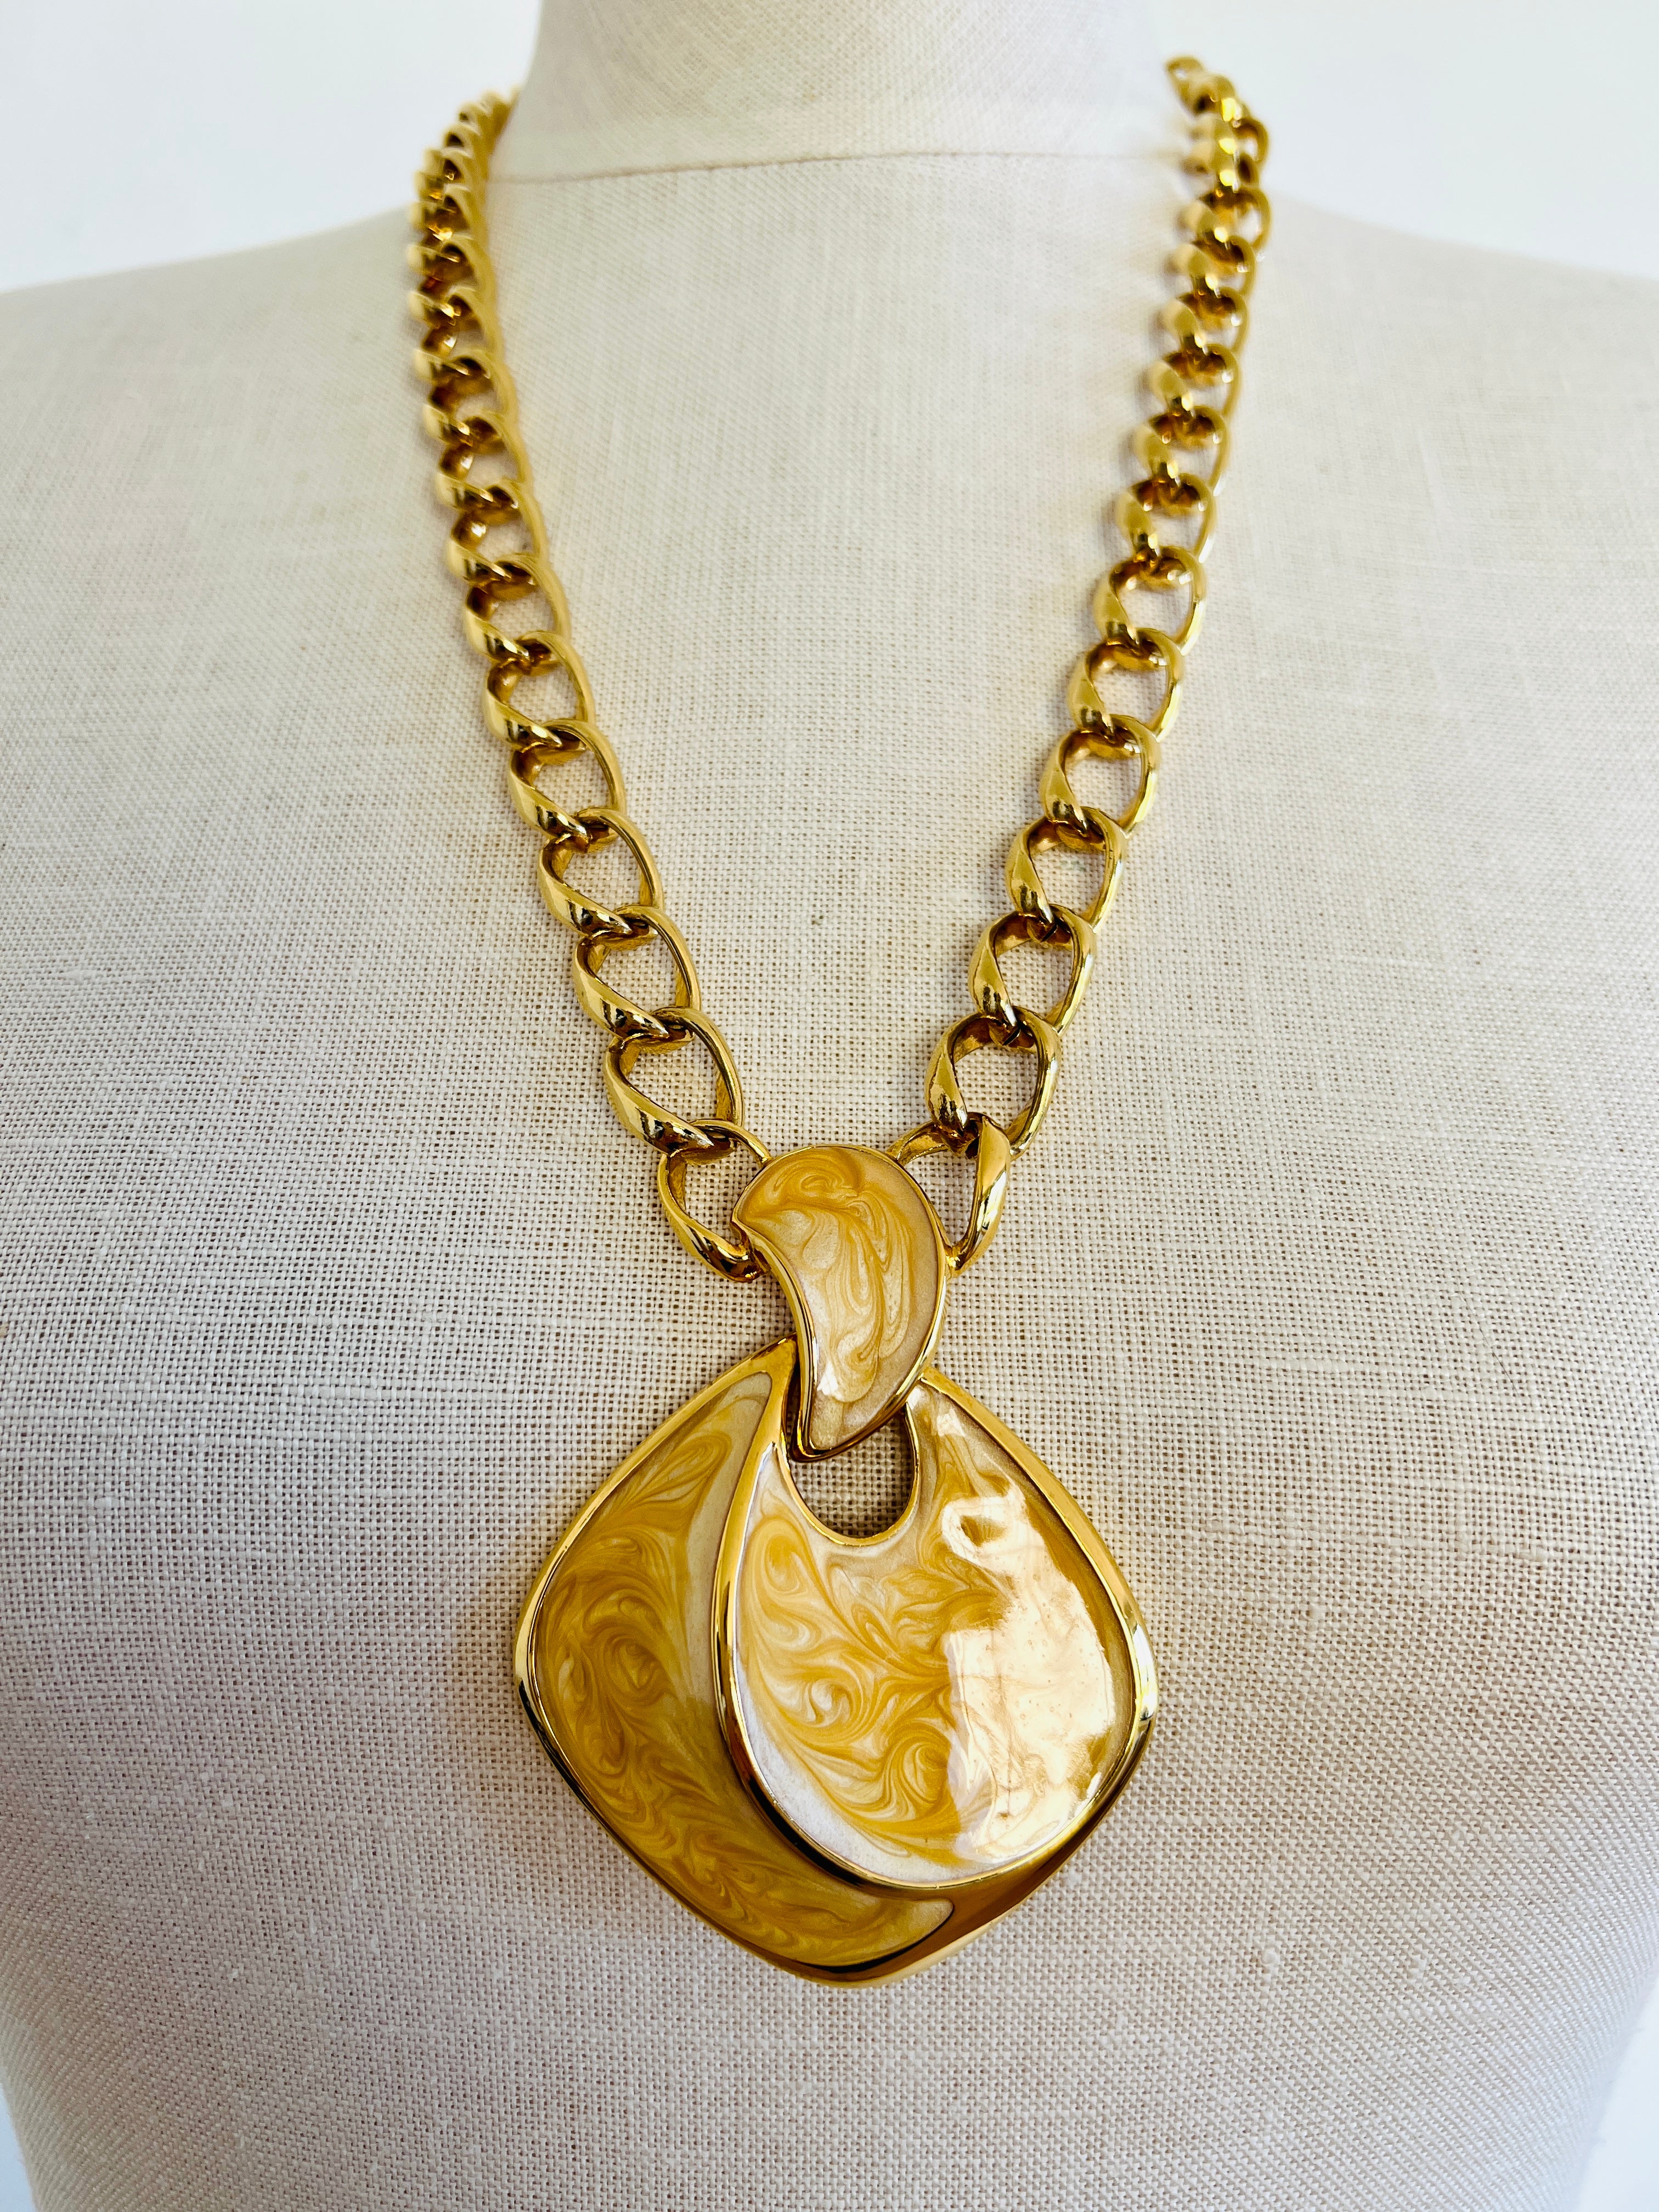 Napier Swirled Enamel Chunky Gold Chain Link Statement Necklace (Collier à maillons en or) en vente 1